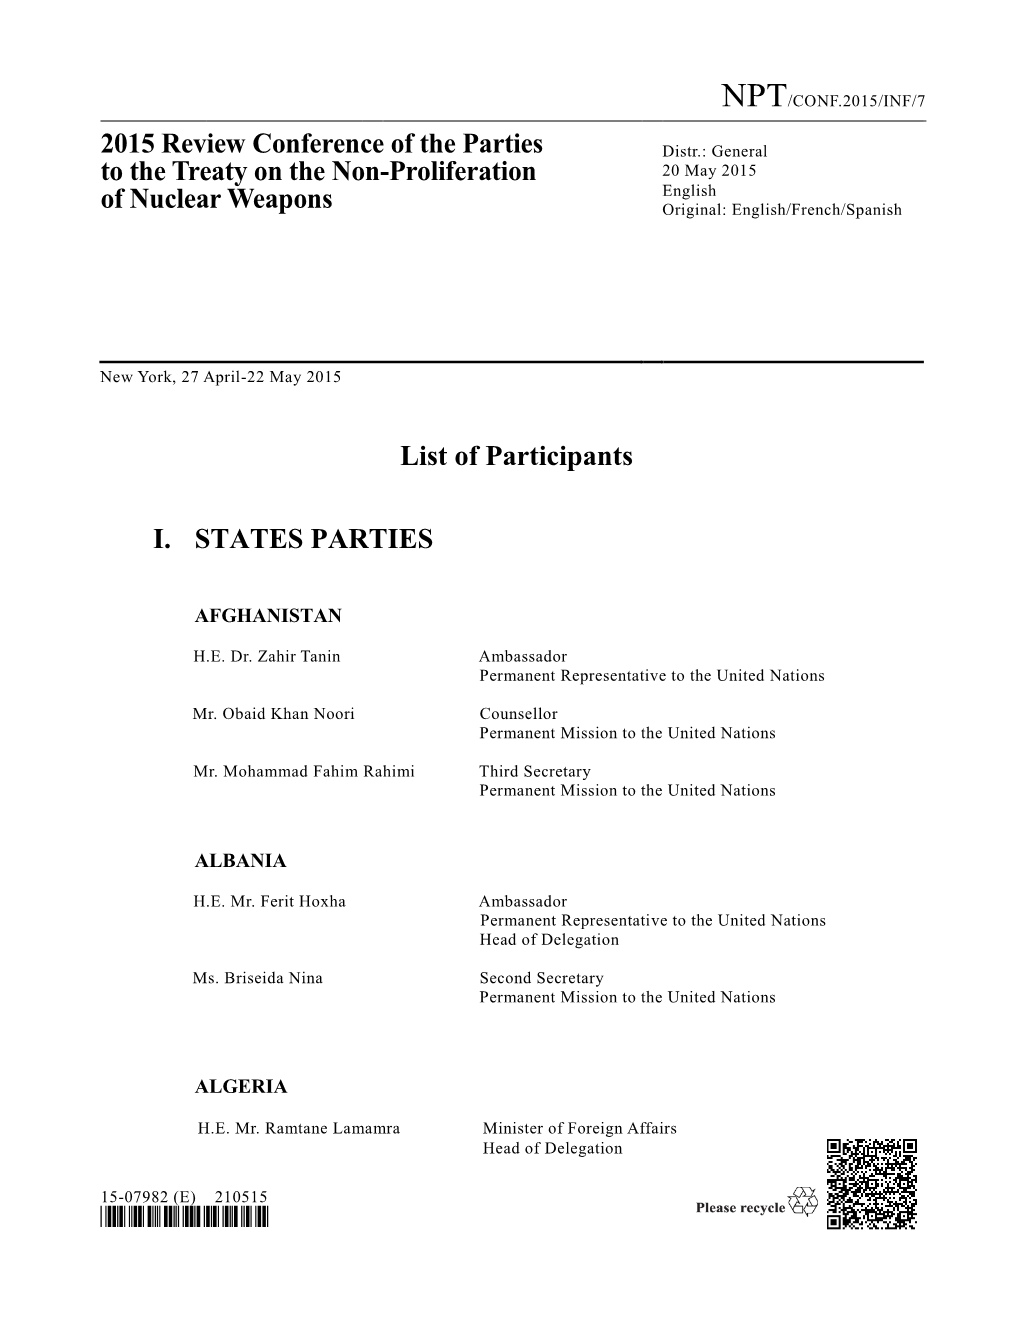 2015 Review Conference of the Parties to the Treaty on the Non-Proliferation of Nuclear Weapons List of Participants I. STATES P